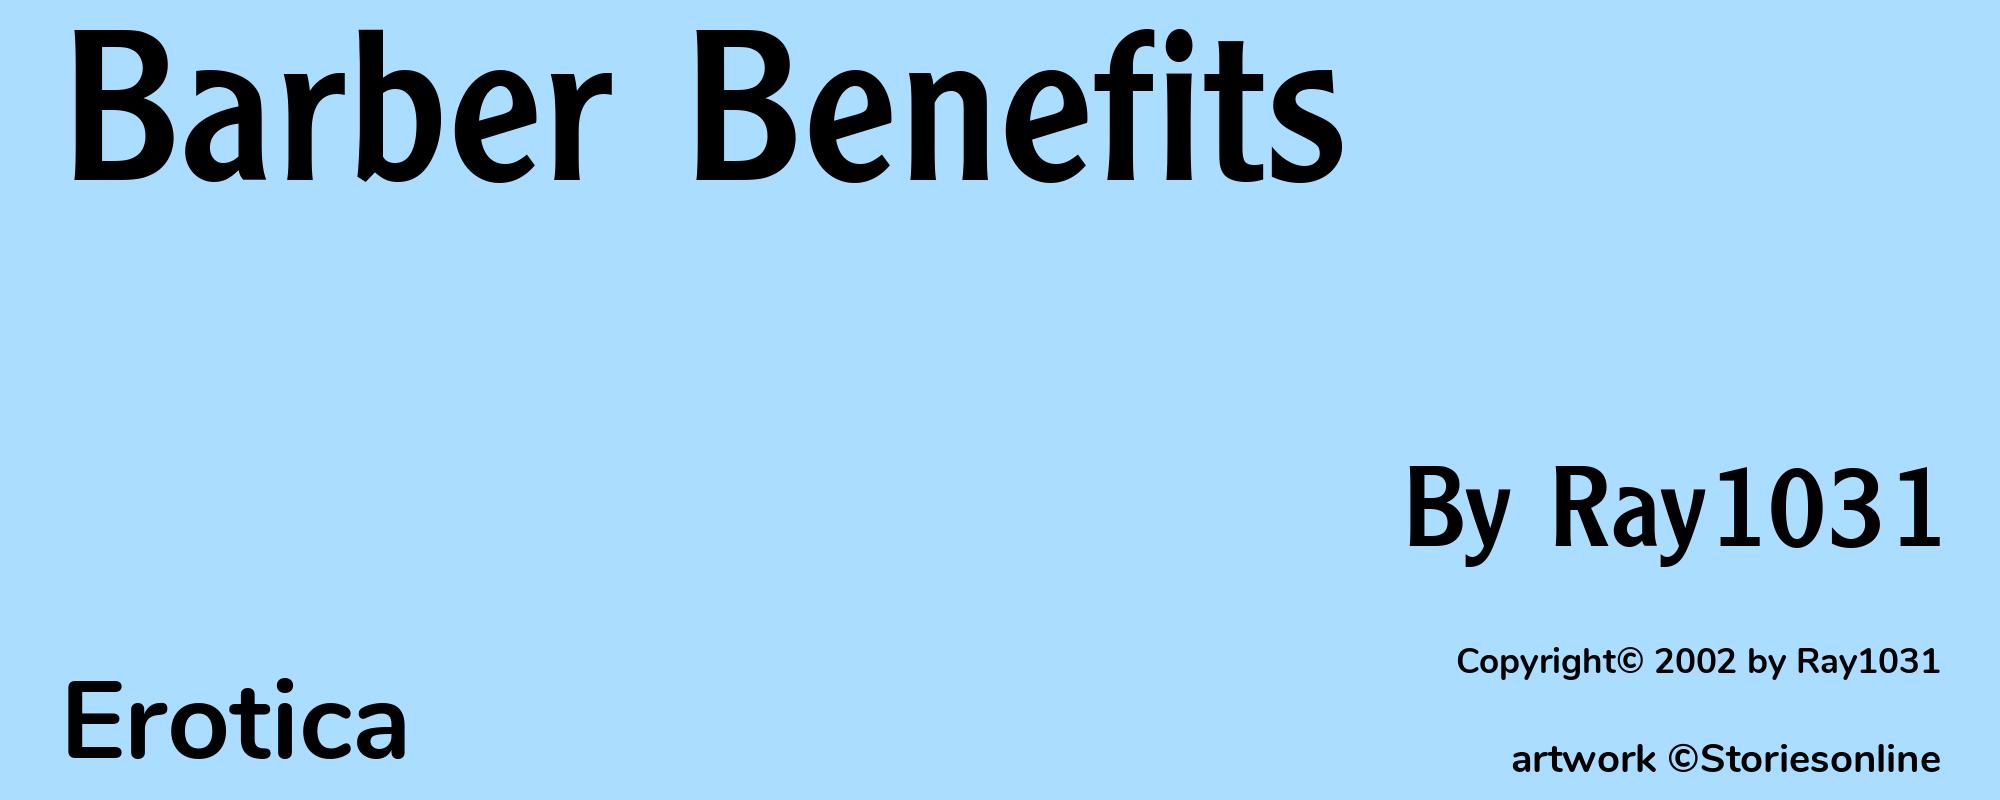 Barber Benefits - Cover